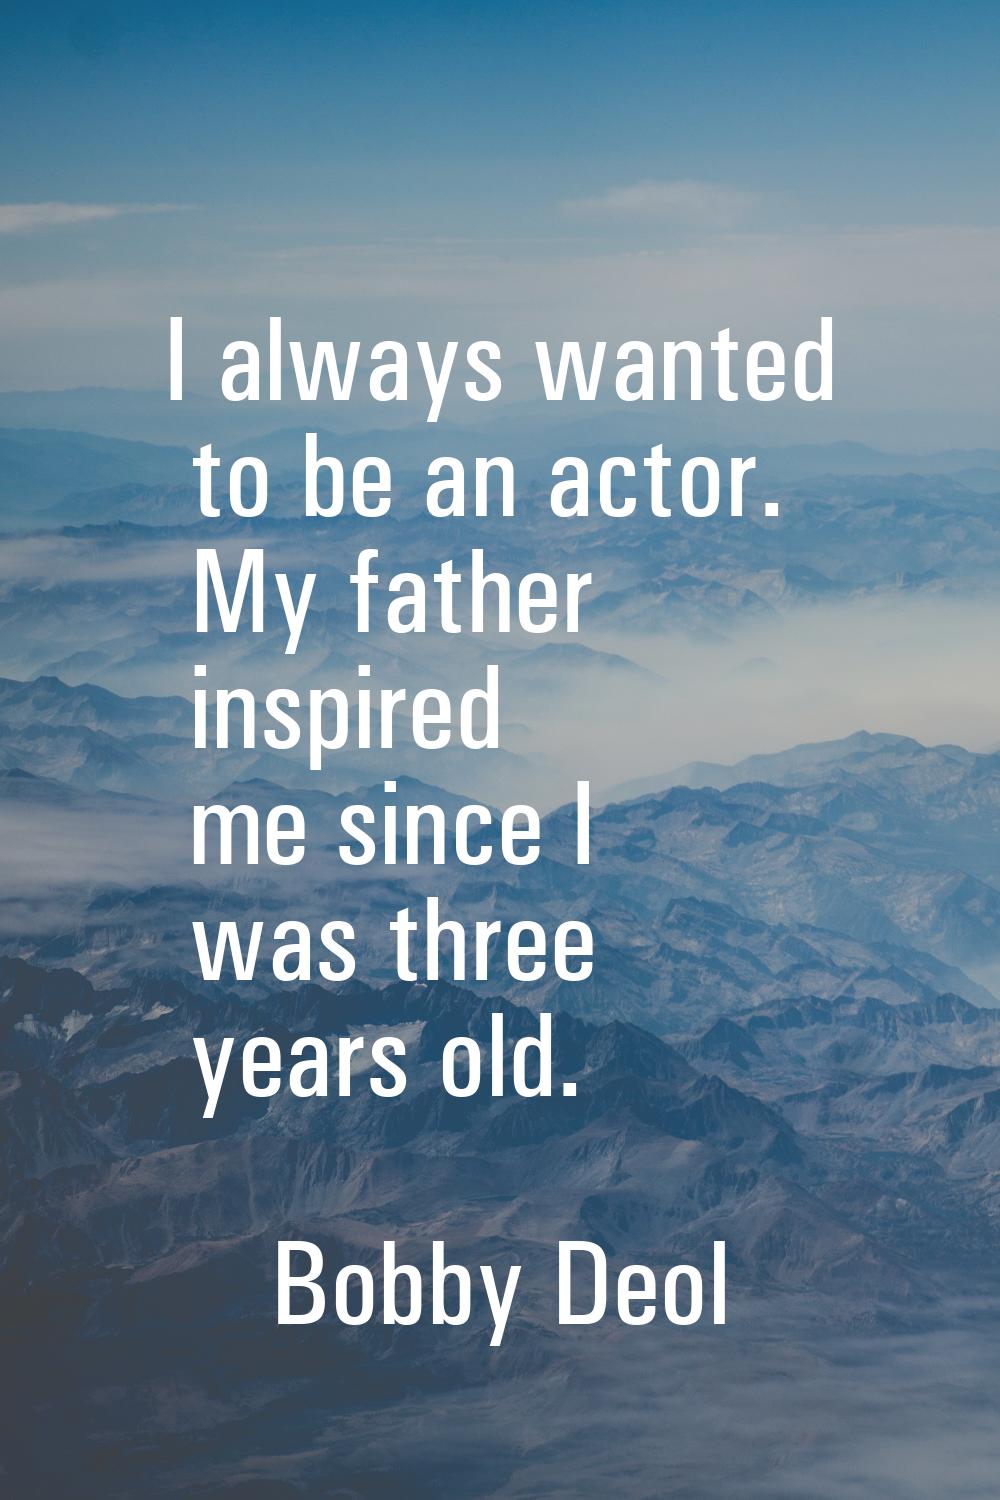 I always wanted to be an actor. My father inspired me since I was three years old.